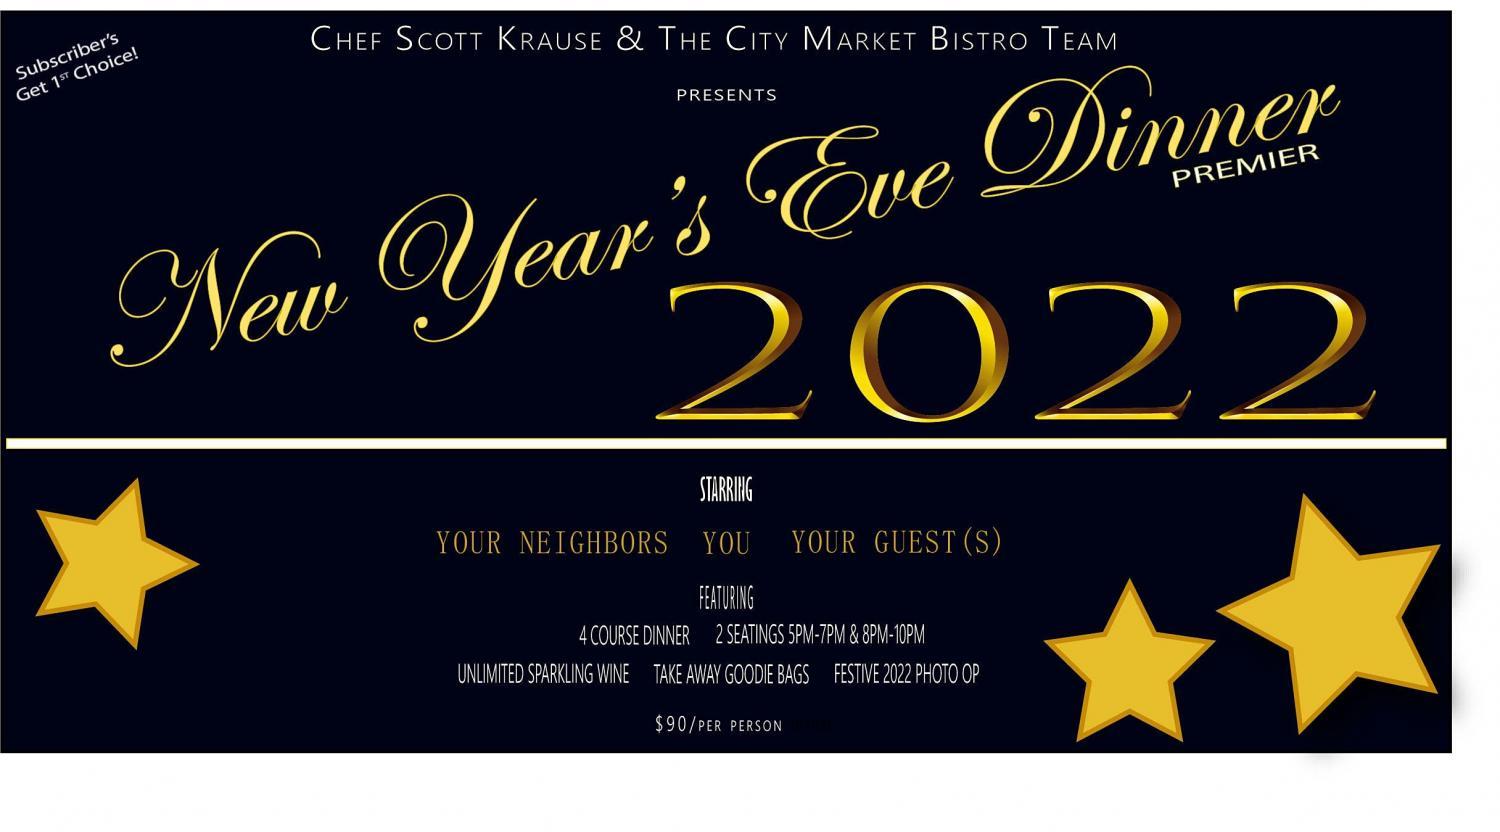 New Year's Eve Dinner/ Premier(5PM-7PM)